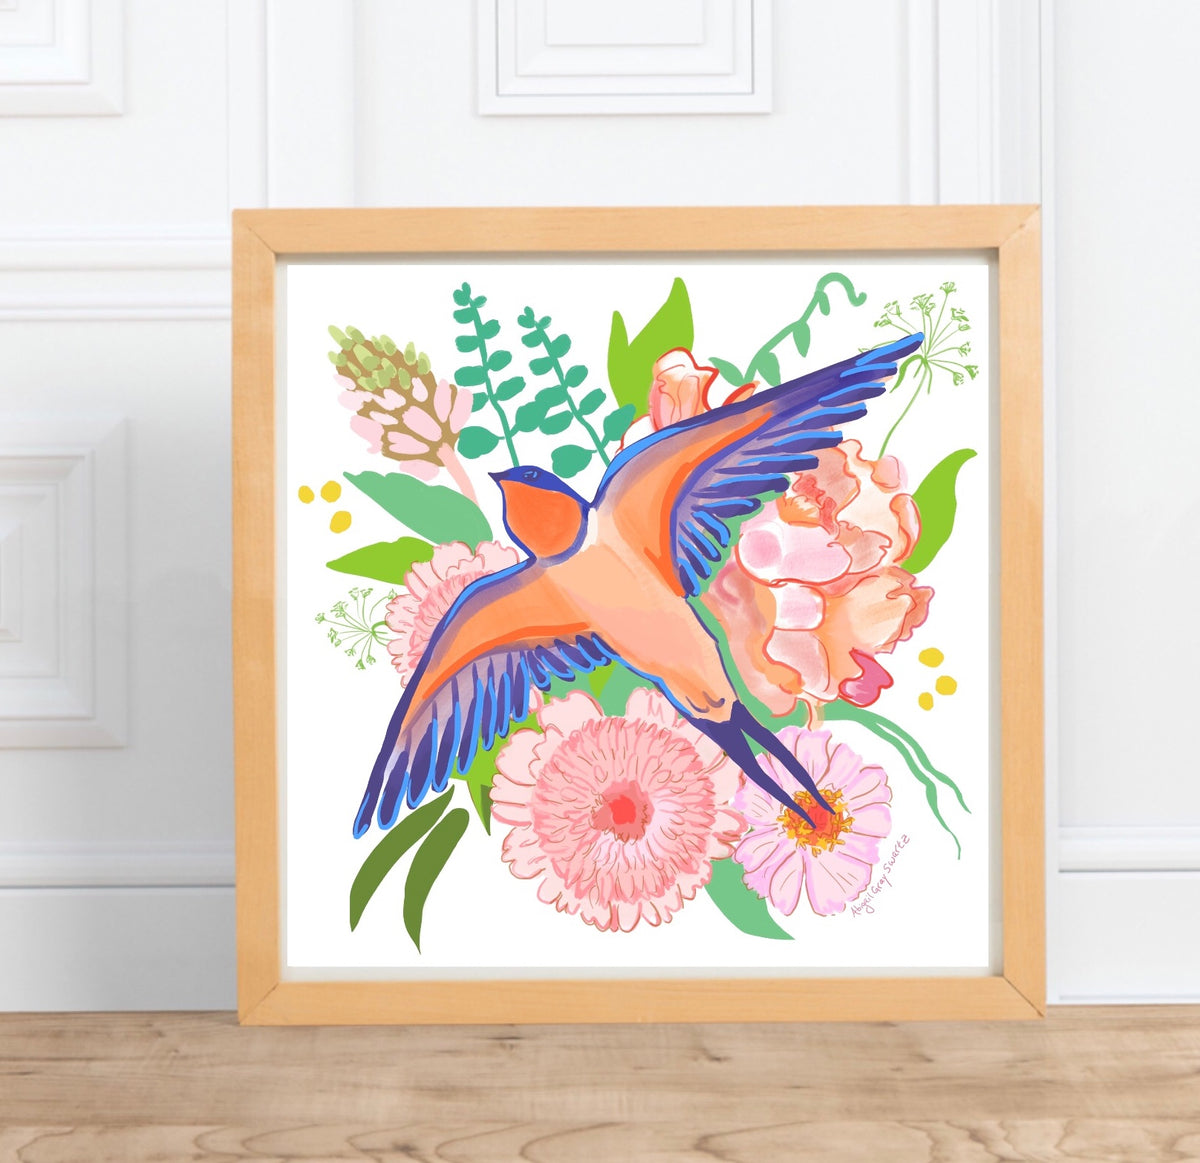 barn swallow and flowers art print, illustration, by Abigail Gray Swartz